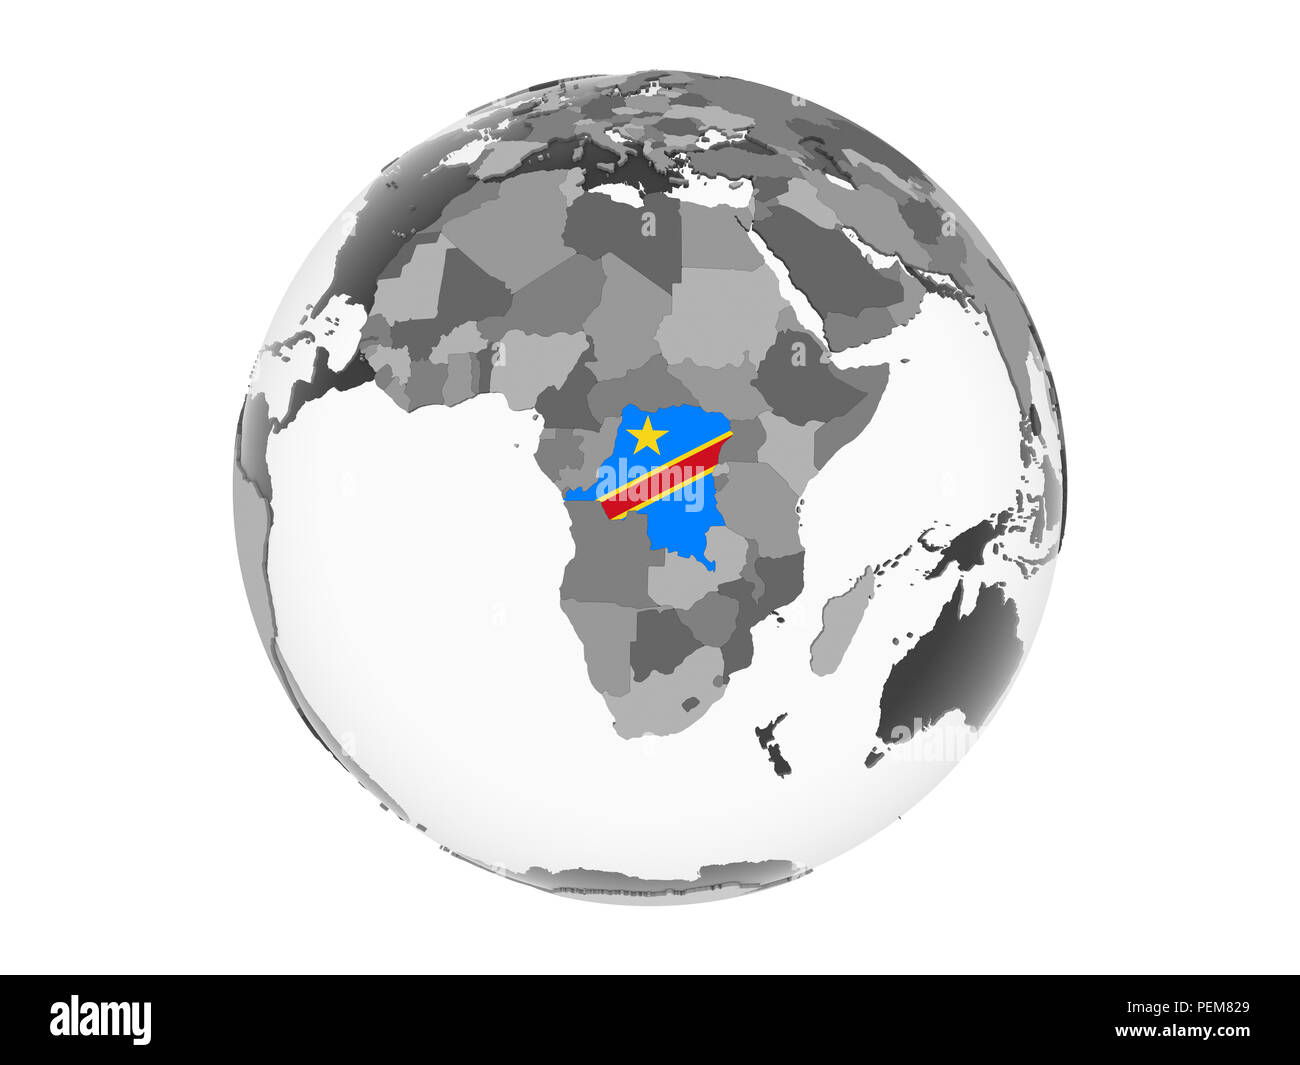 Democratic Republic of Congo on gray political globe with embedded flag. 3D illustration isolated on white background. Stock Photo